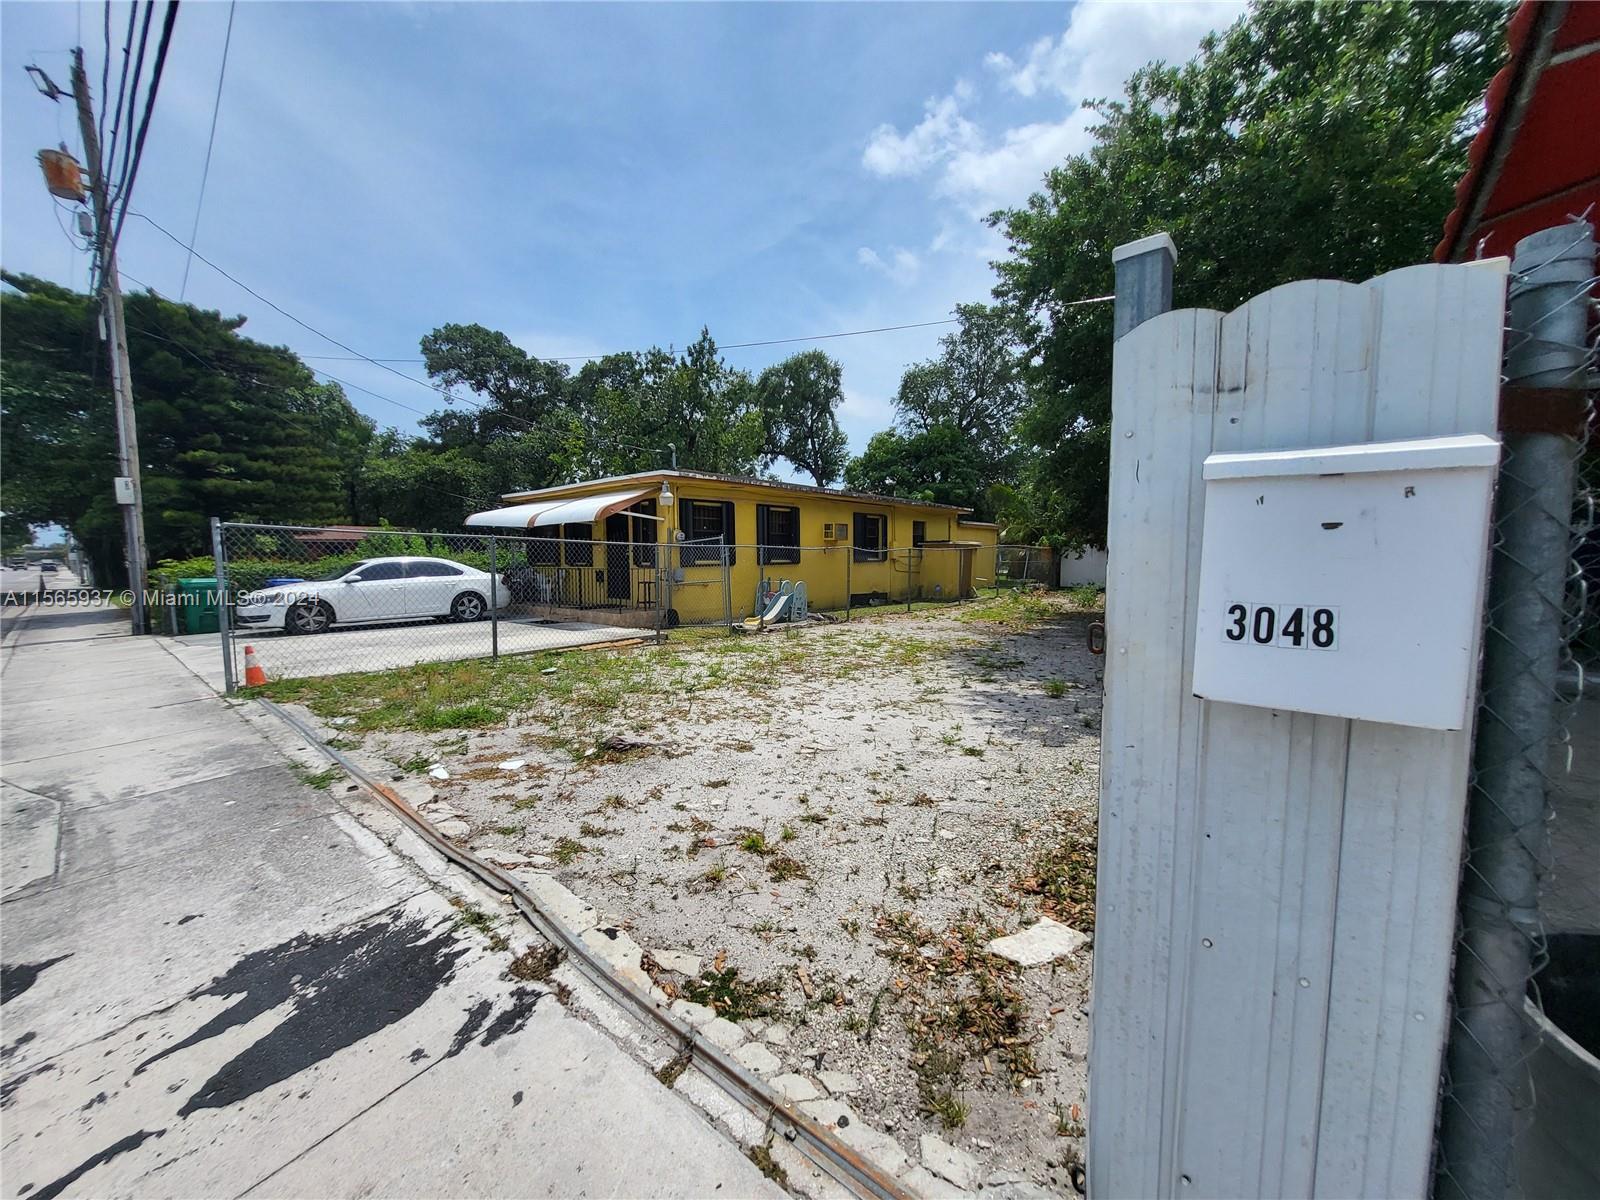 Photo of 3048 NW 46th St in Miami, FL